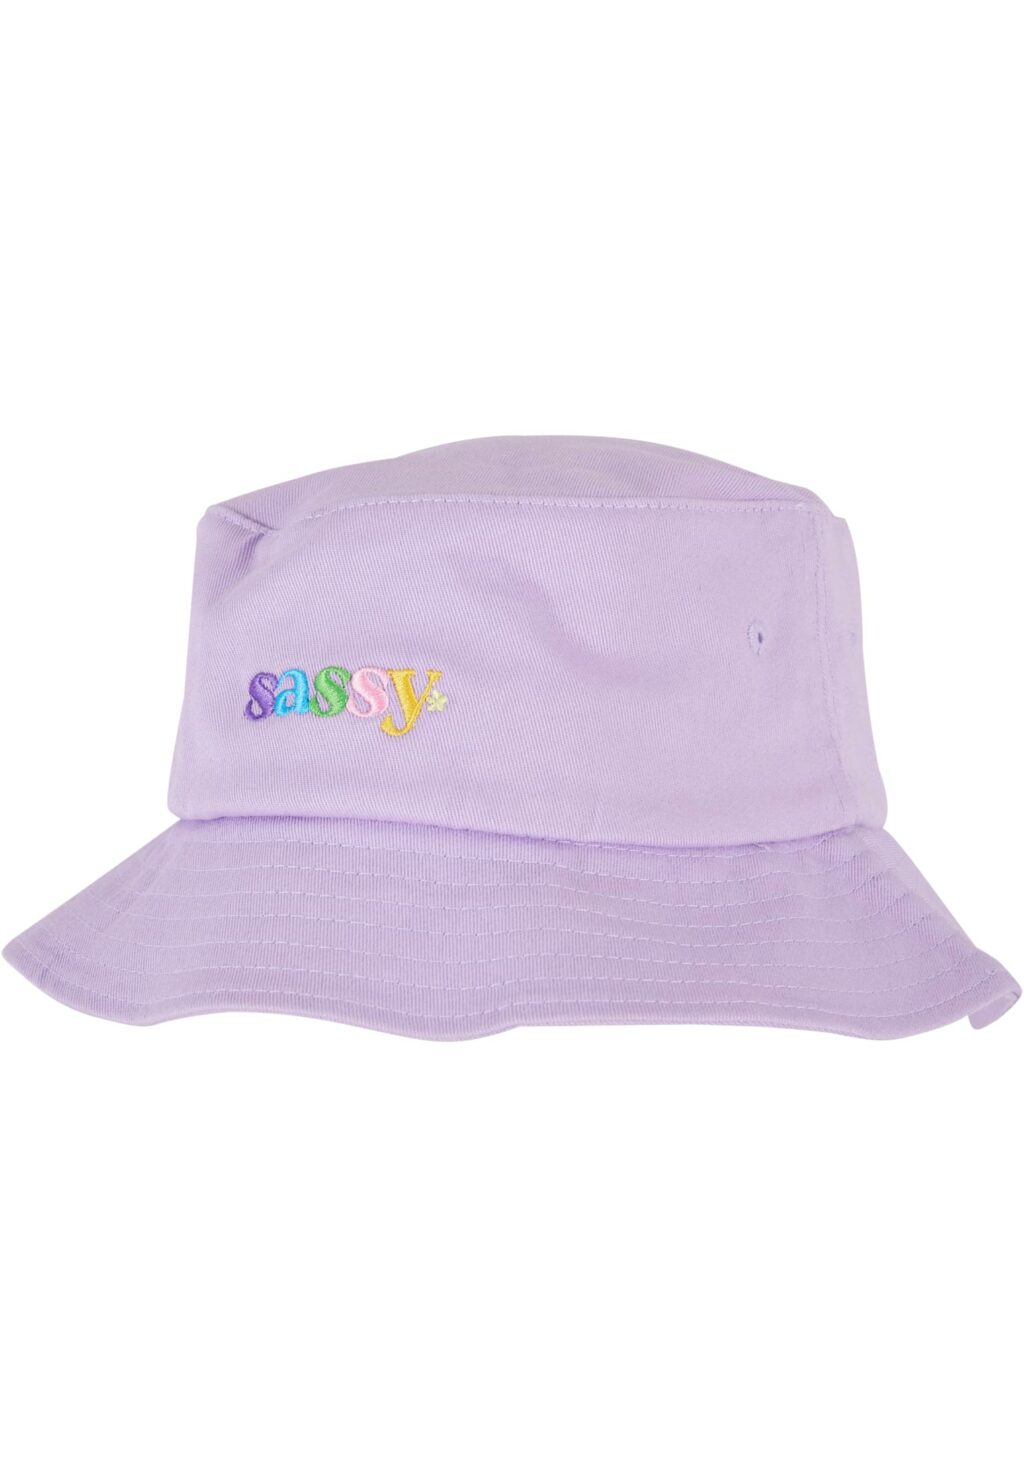 Sassy Bucket Hat lilac one BE080